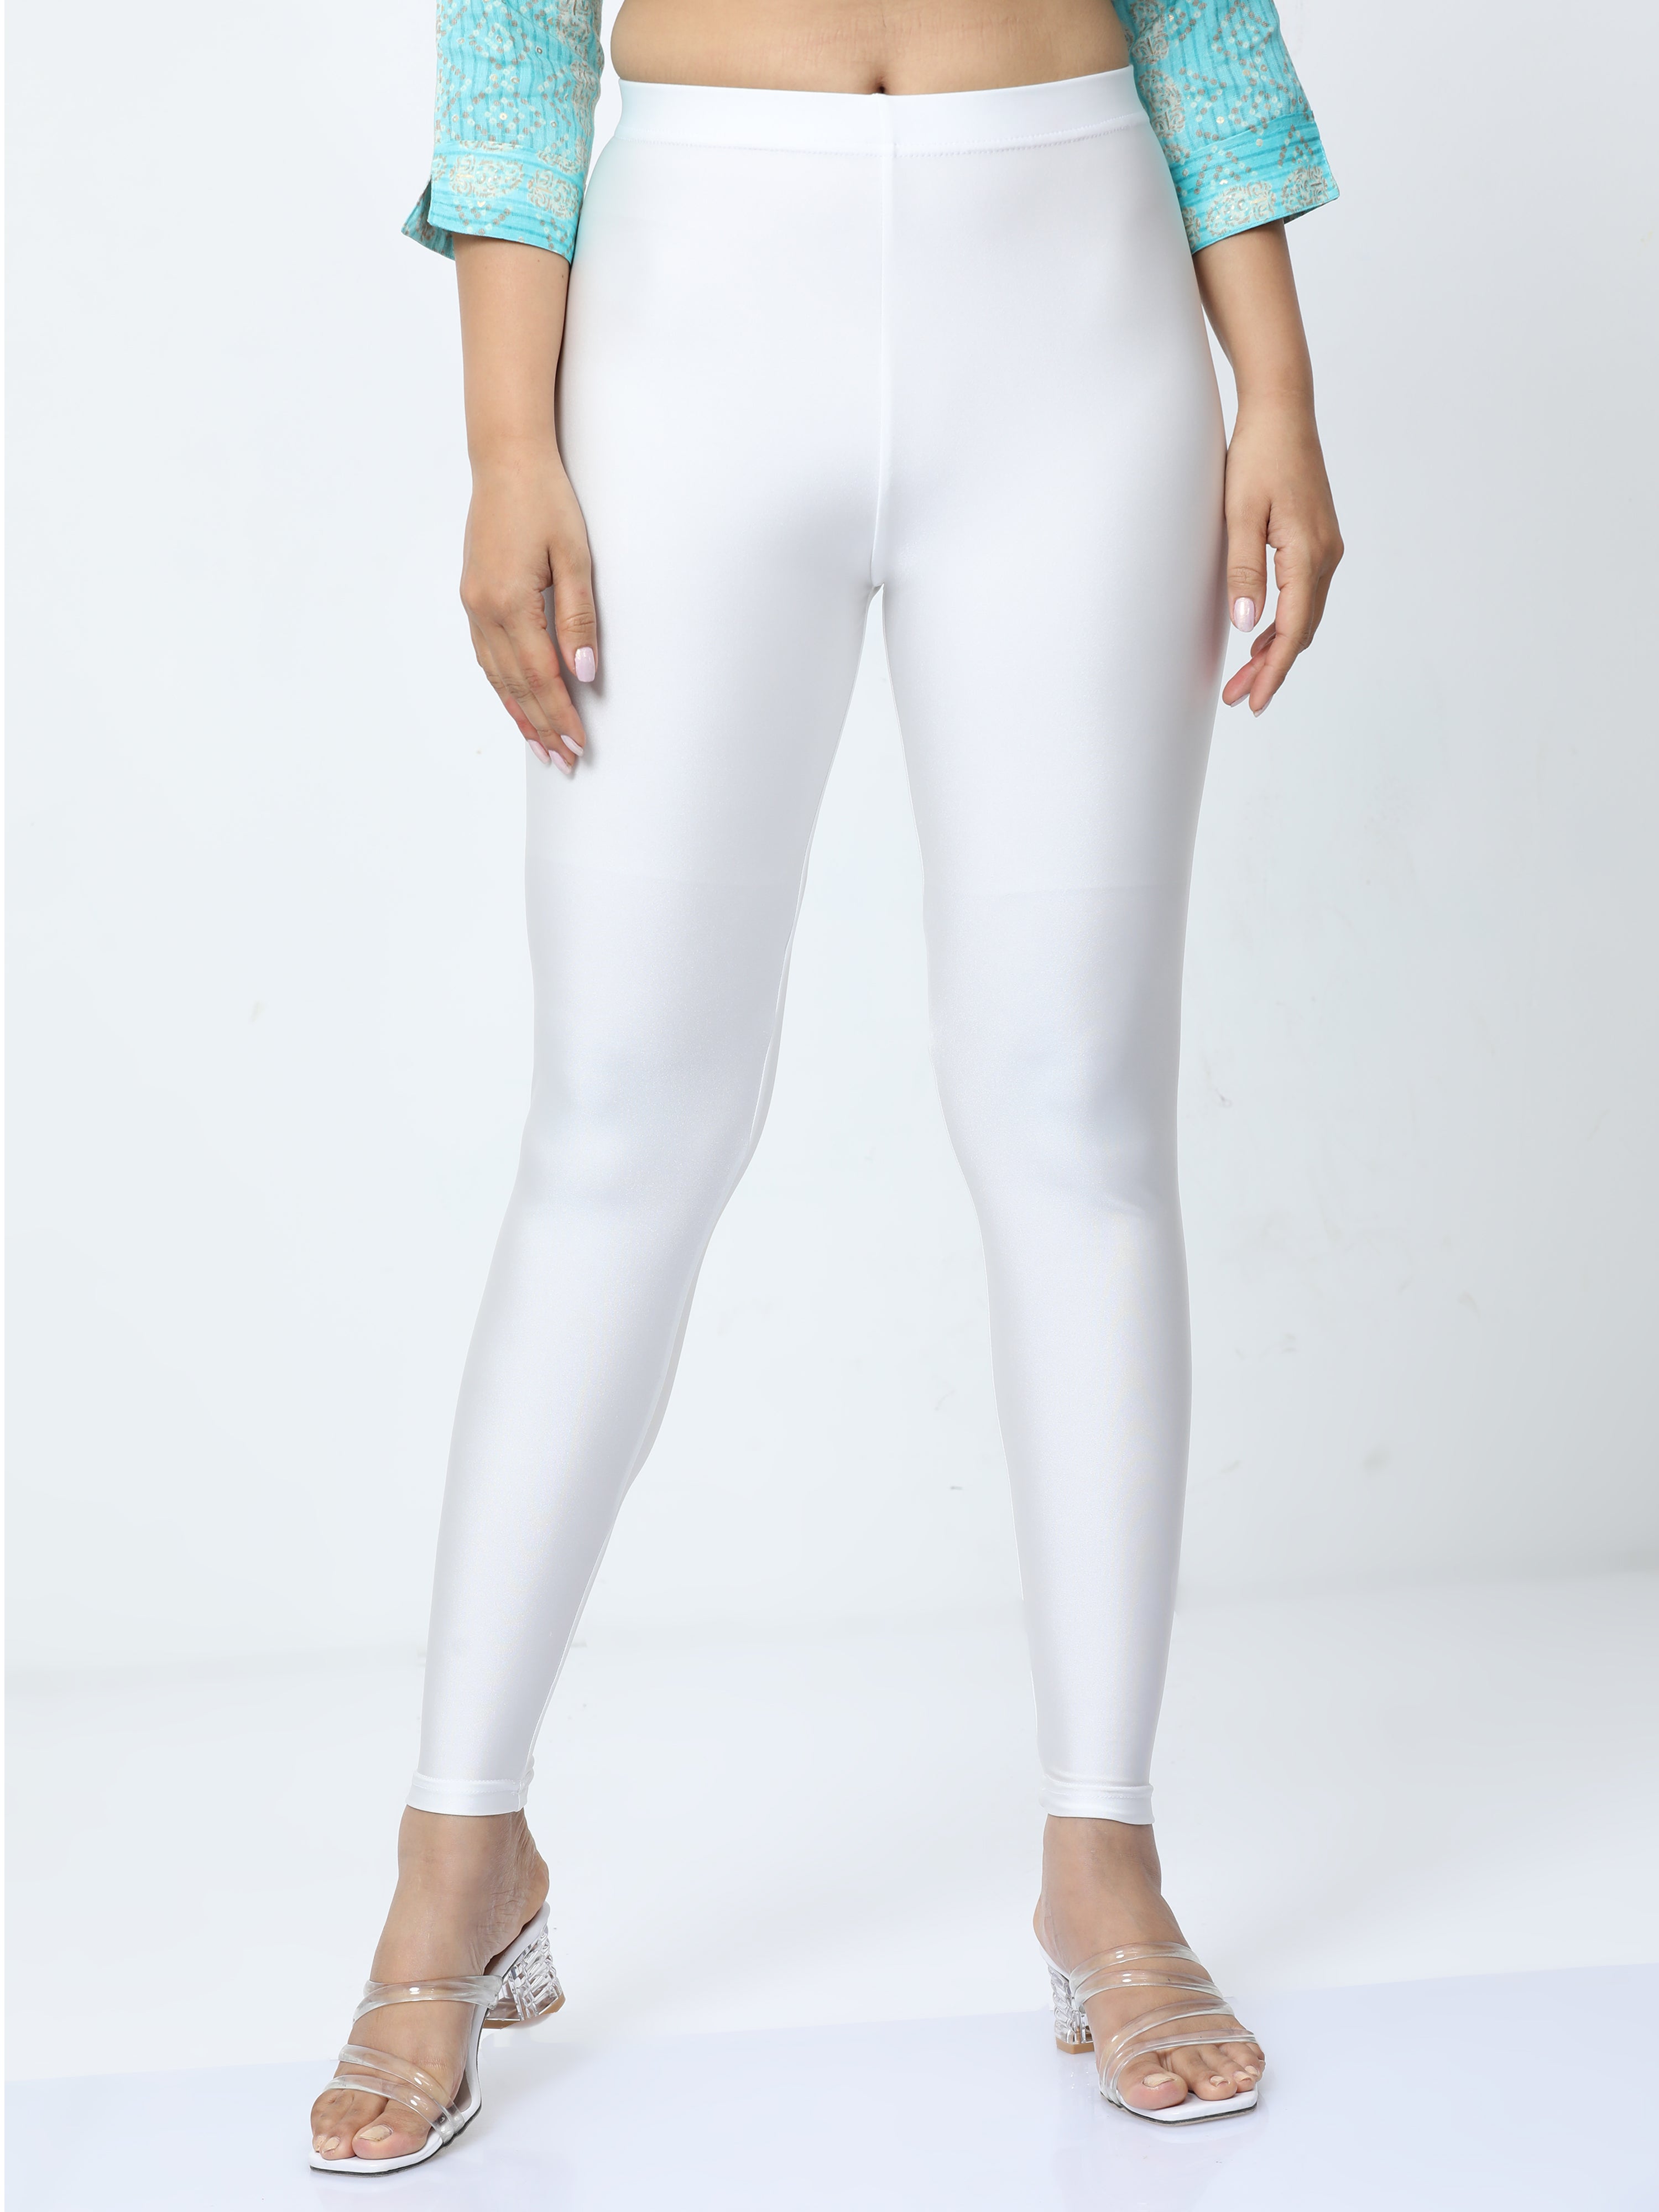 Go Colors Women White Solid Skinny Fit Shimmer Ankle-Length Leggings Price  in India, Full Specifications & Offers | DTashion.com